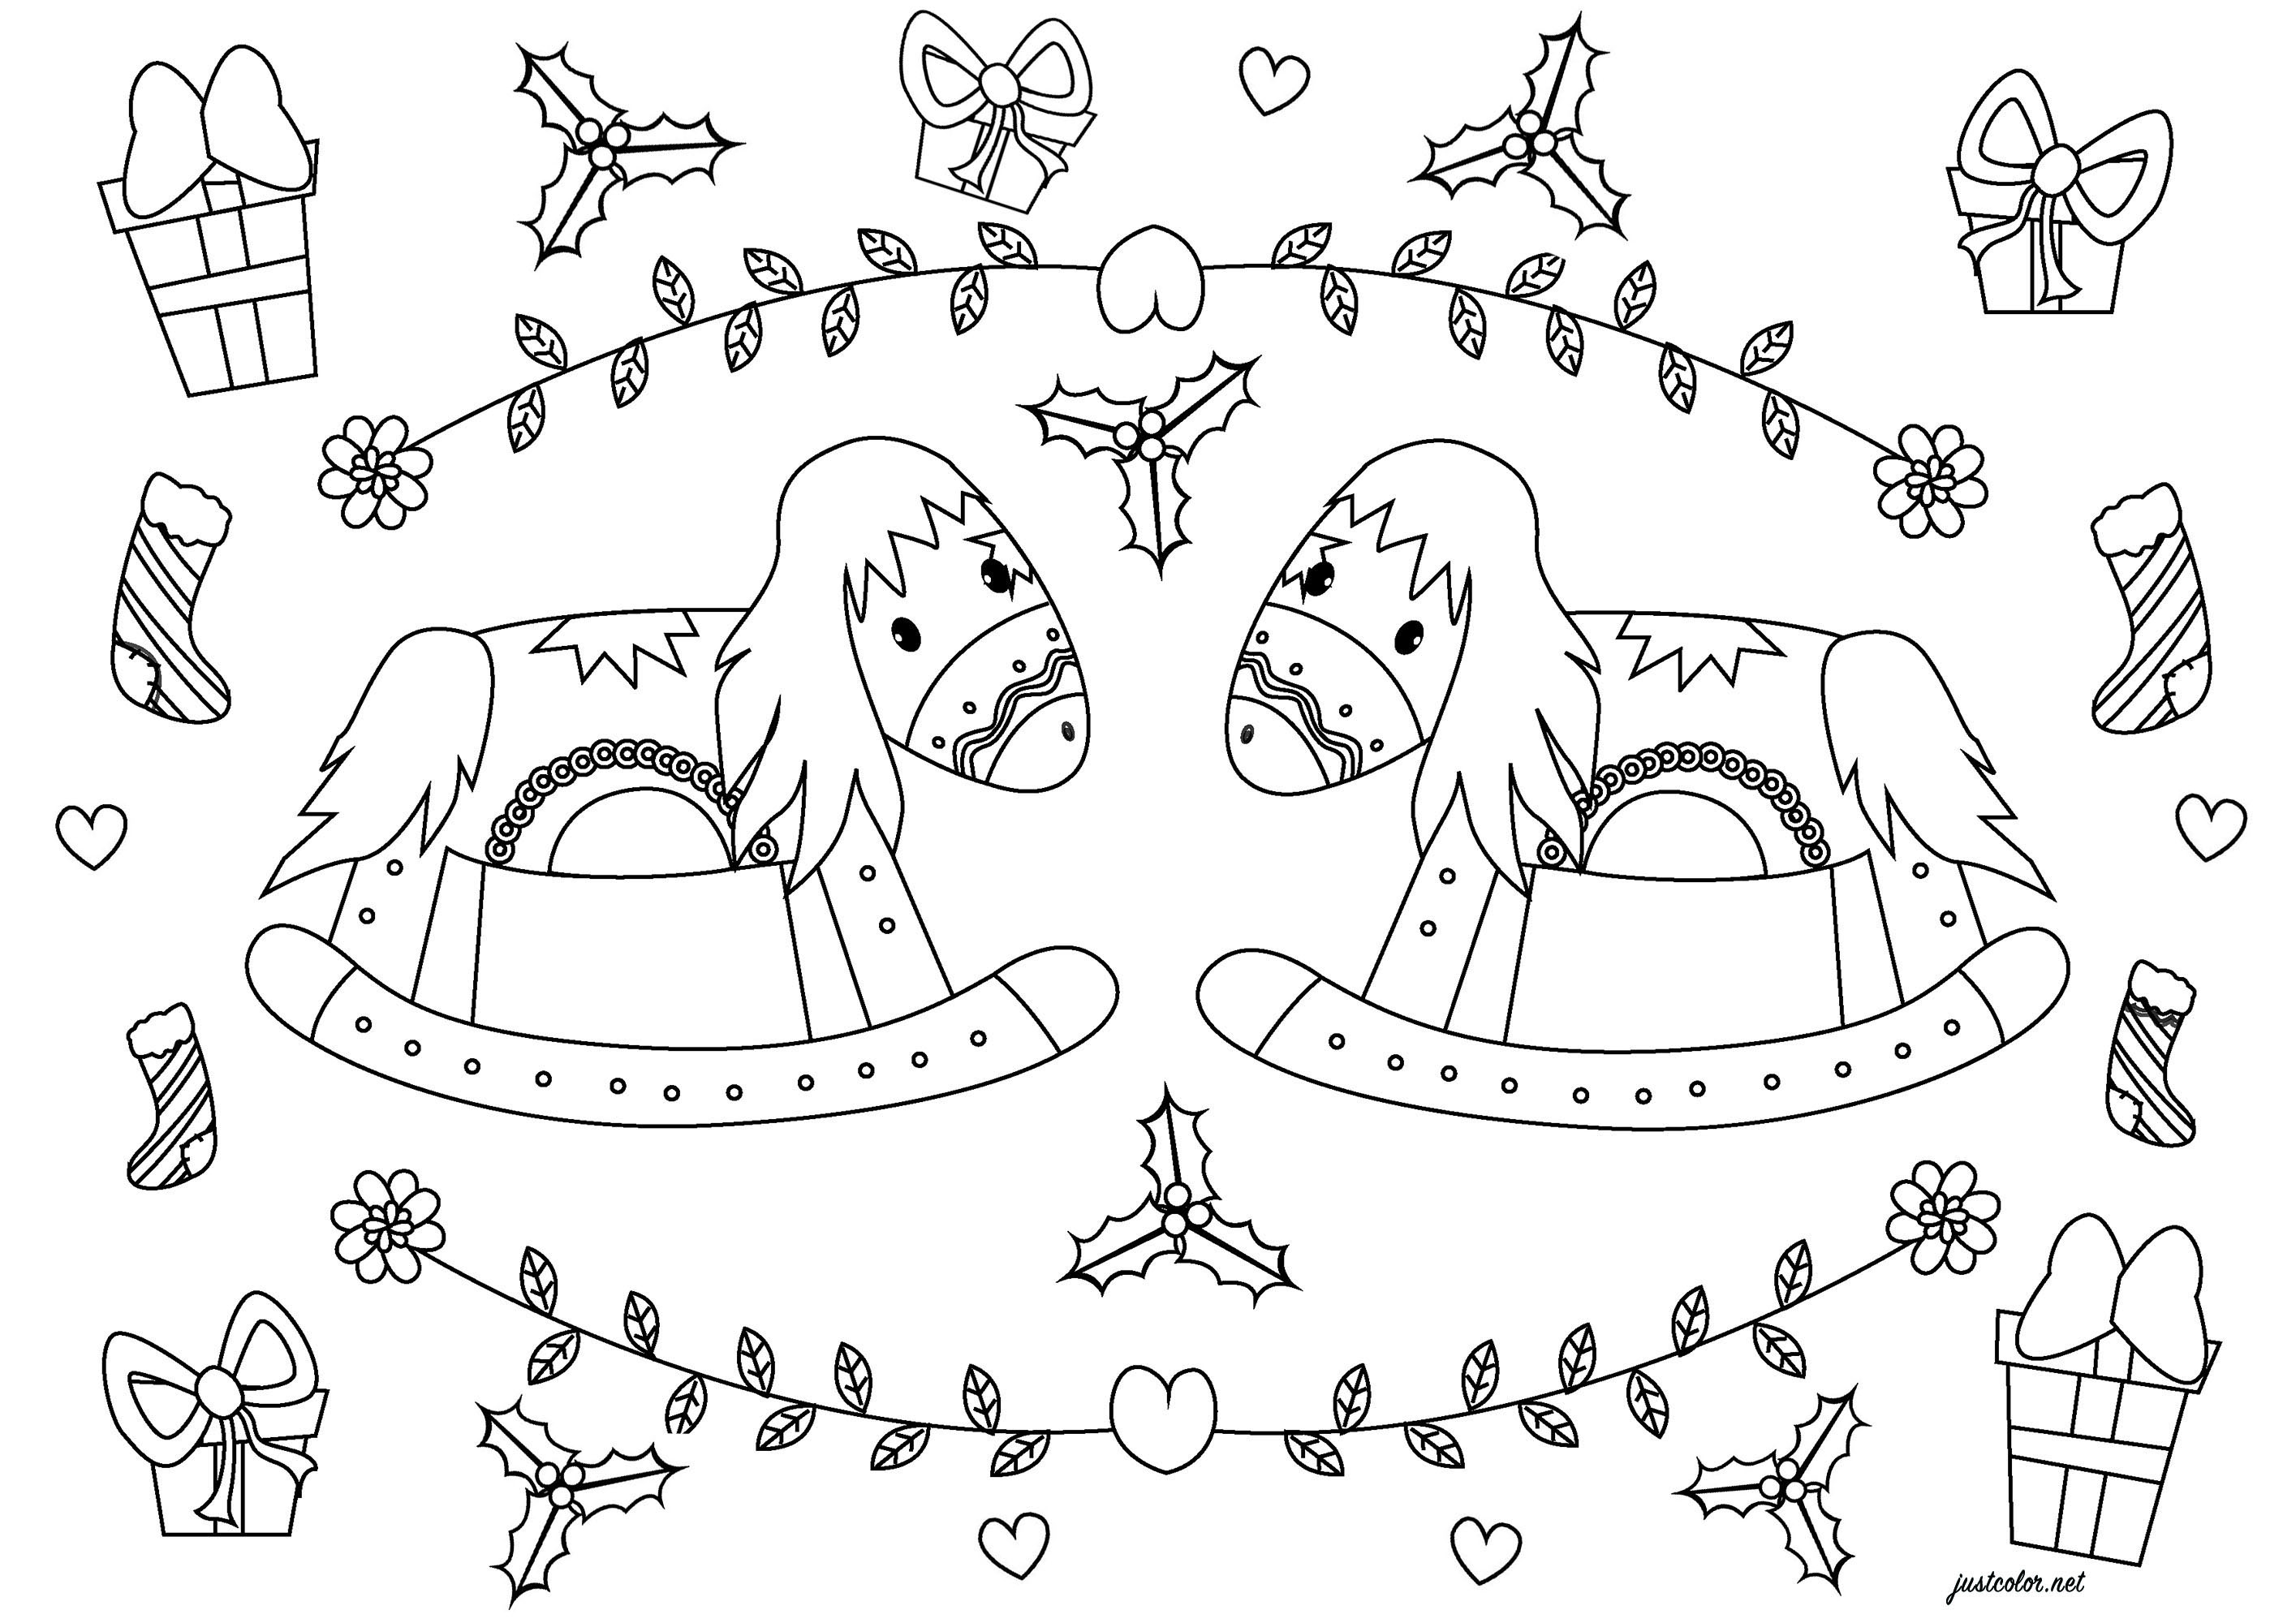 An original Christmas coloring page with two rocking horses. Also color many typical Christmas elements